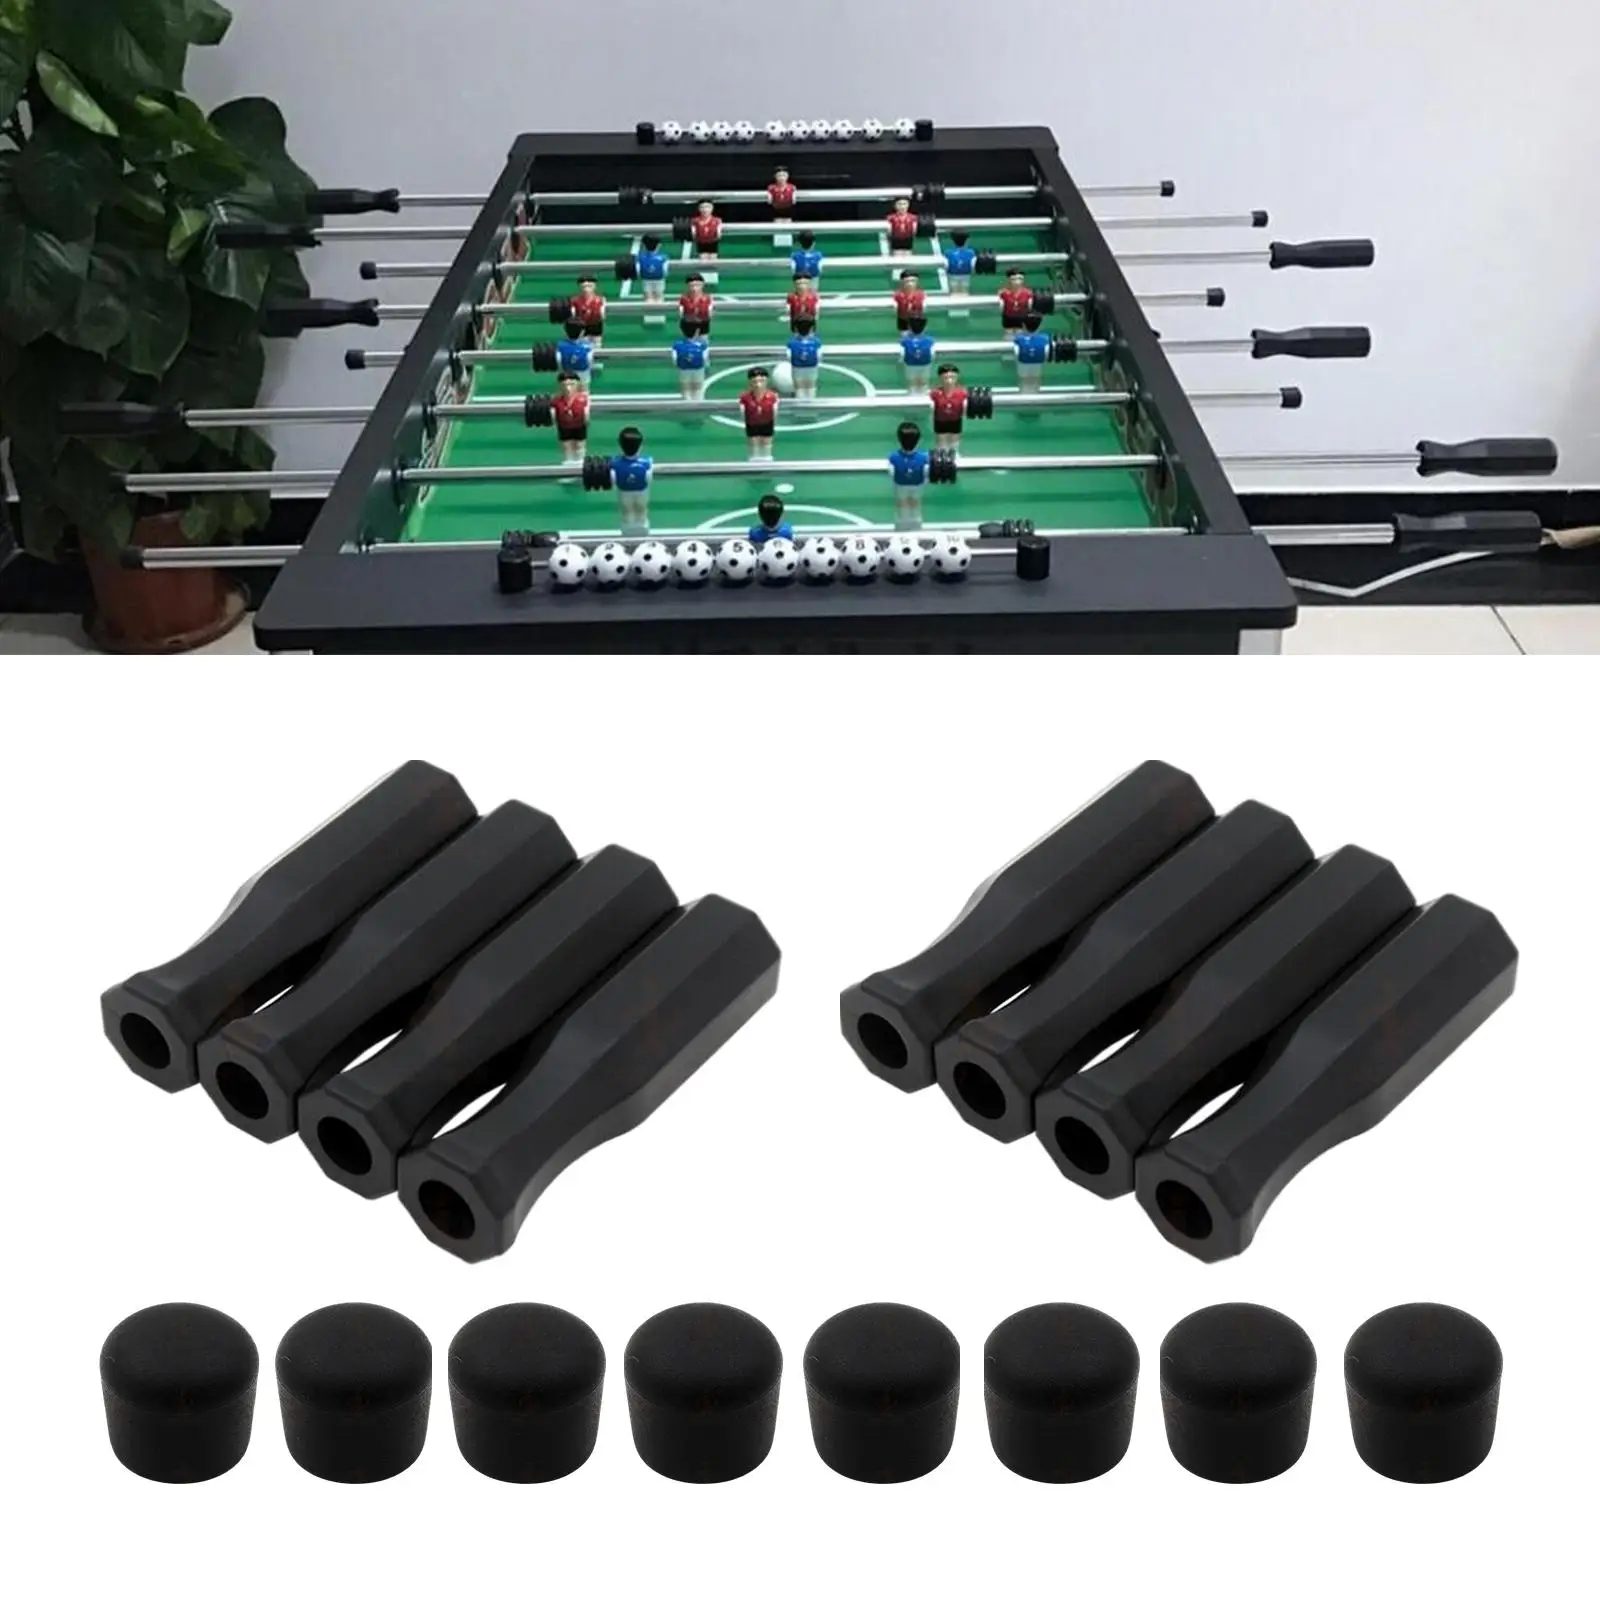 16 Pieces Octagonal Grips And Safety End Caps Standard Foosball Tables